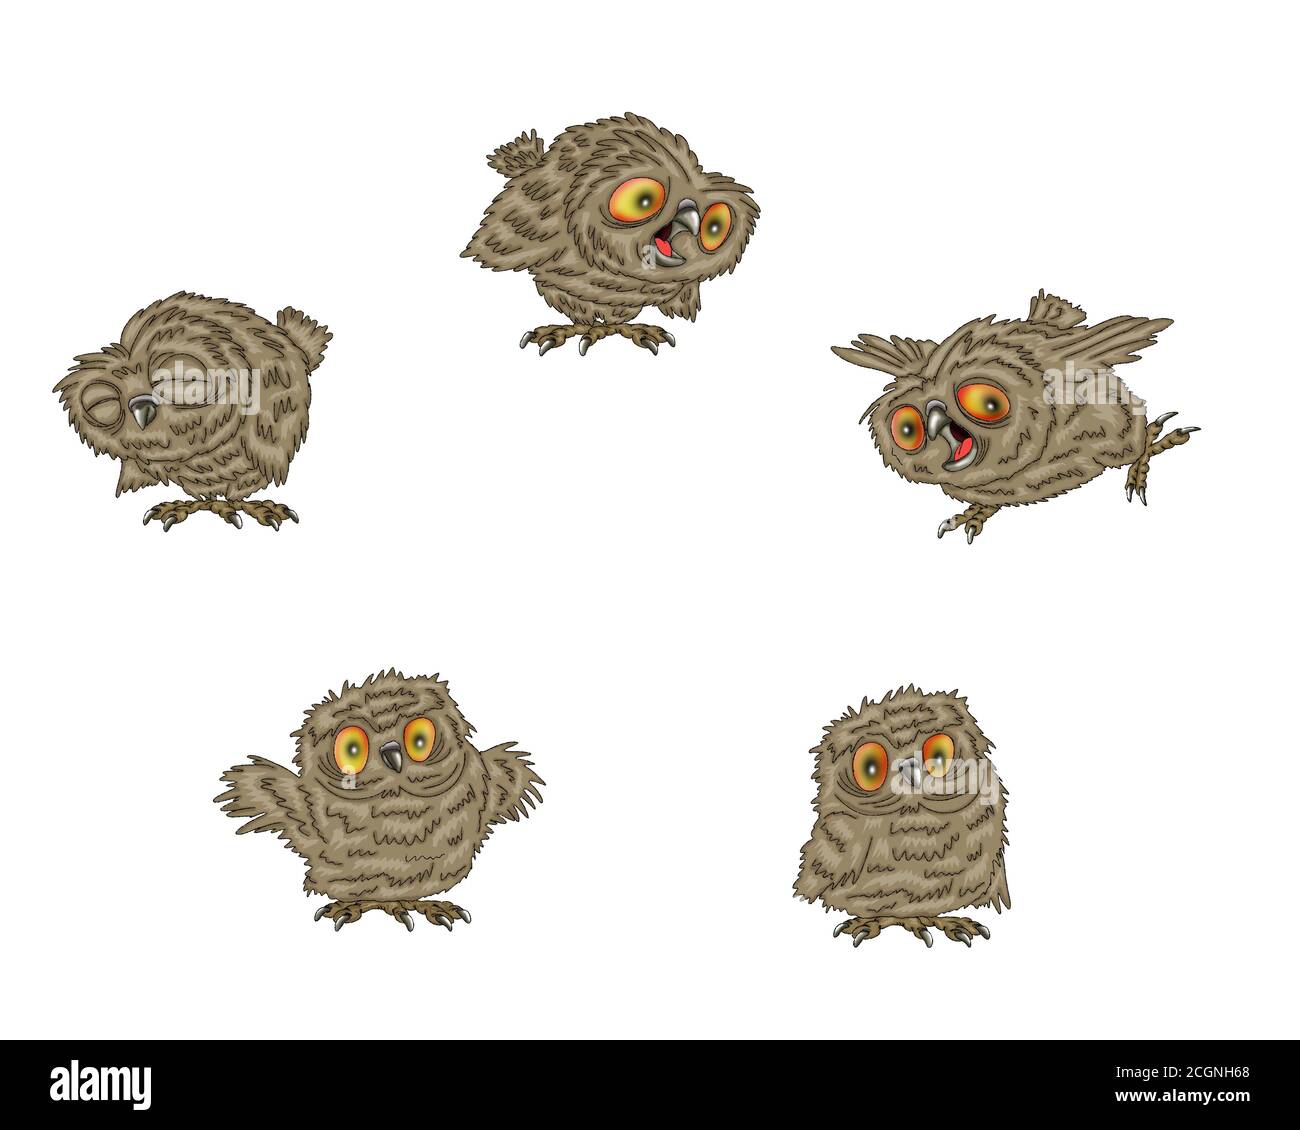 Owls in different variations for design. Isolated illustration on a white background.. Stock Photo